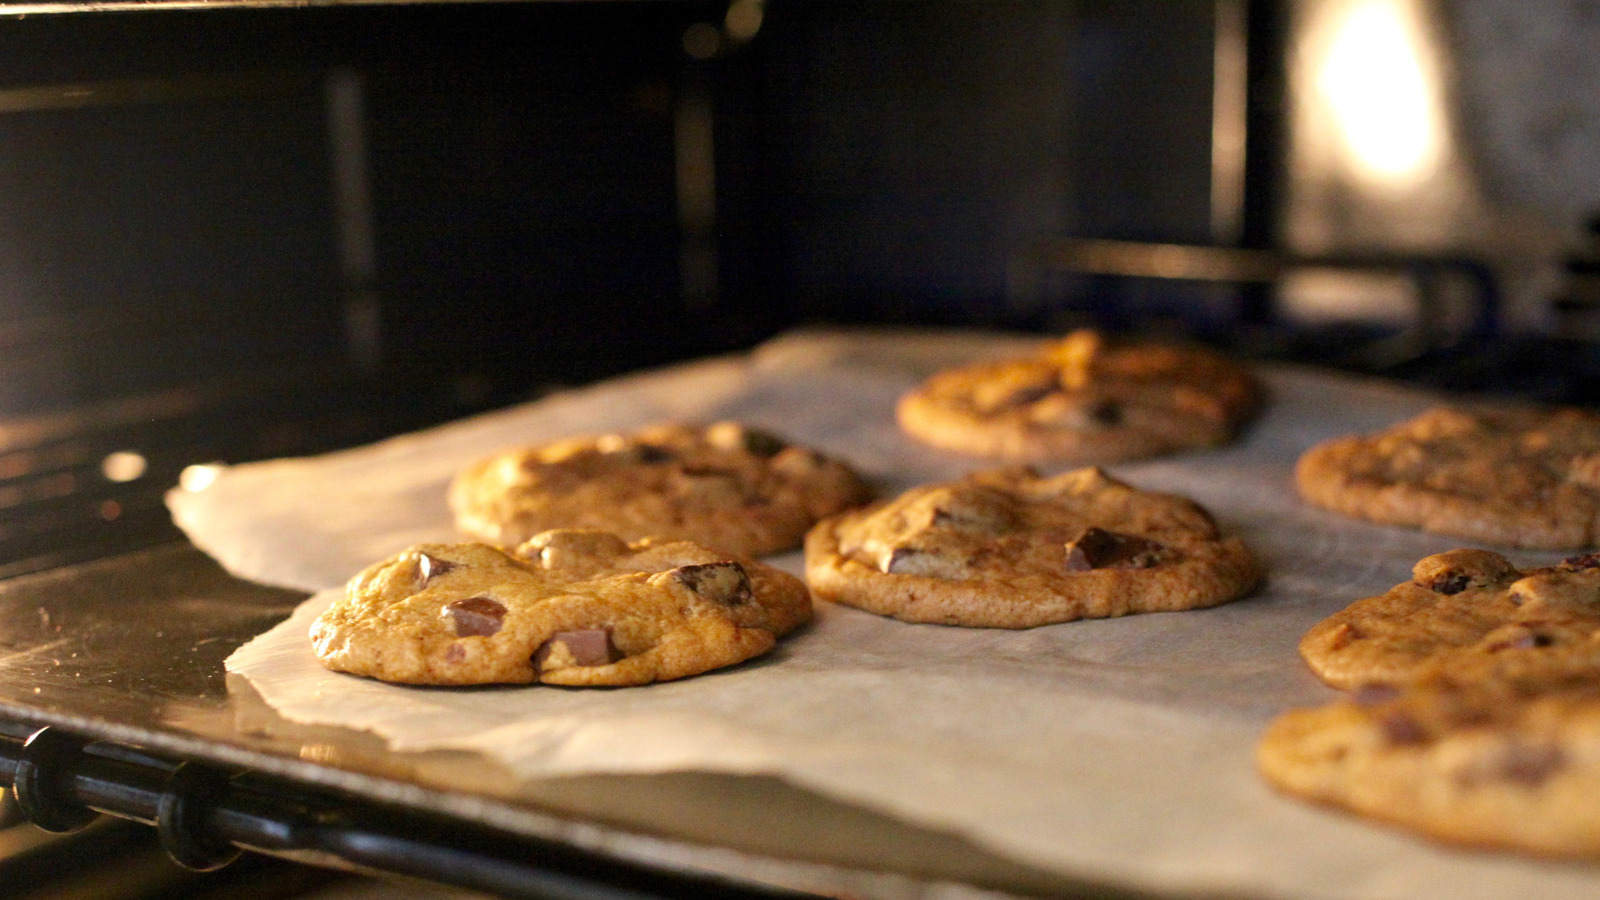 Why You Should Avoid Using Old Cookie Sheets